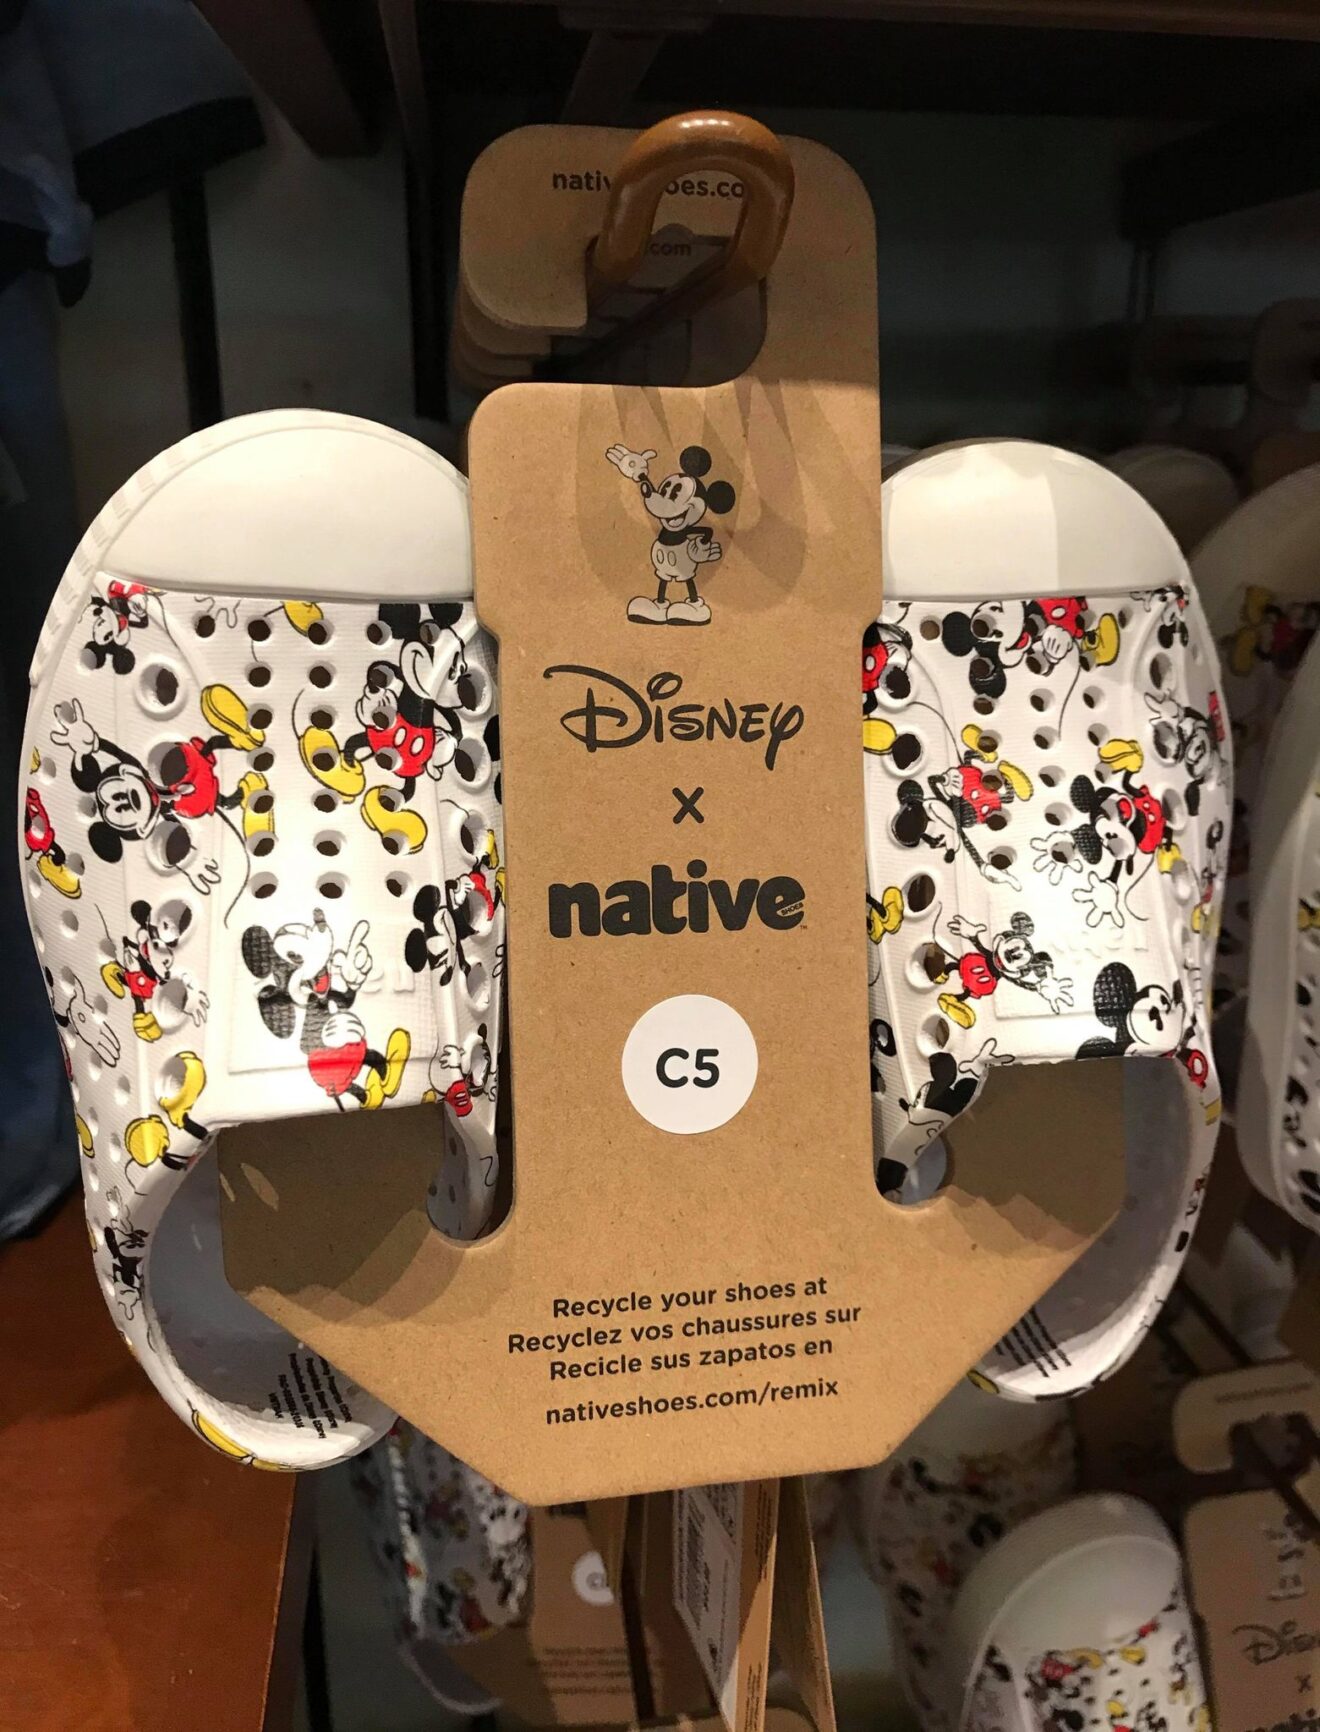 New Disney Native Shoes Let You Step Out in Magical Style